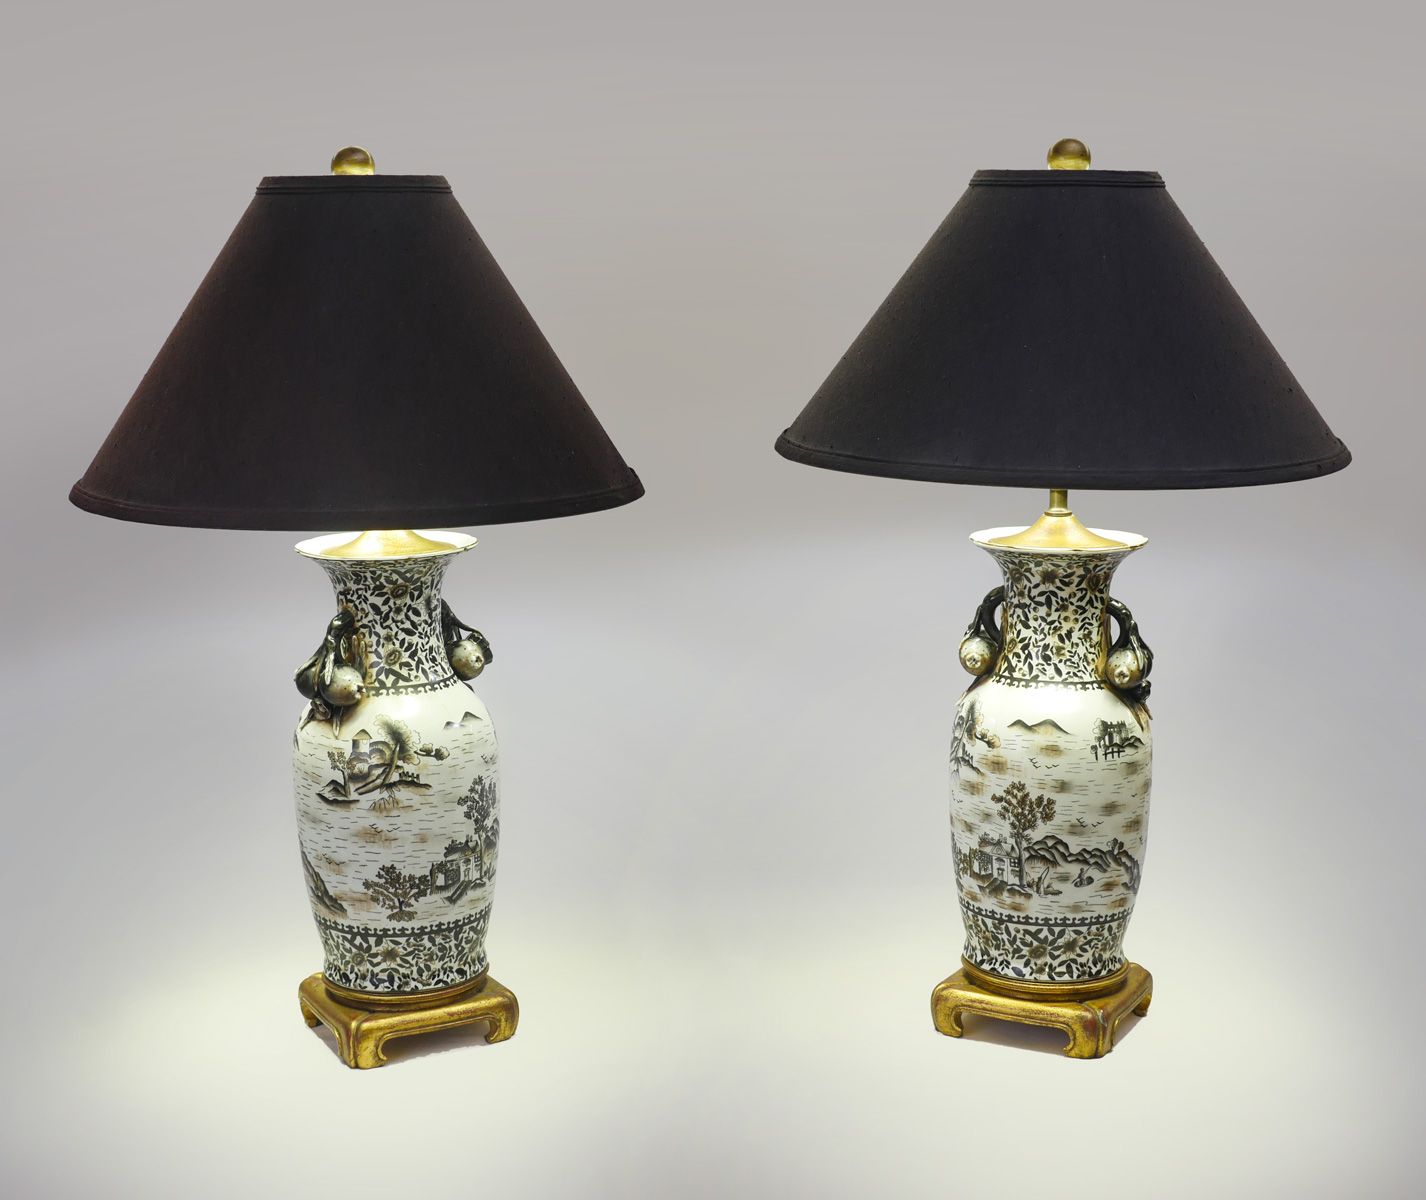 PAIR OF ORIENTAL LAMPS: 2- Chinese